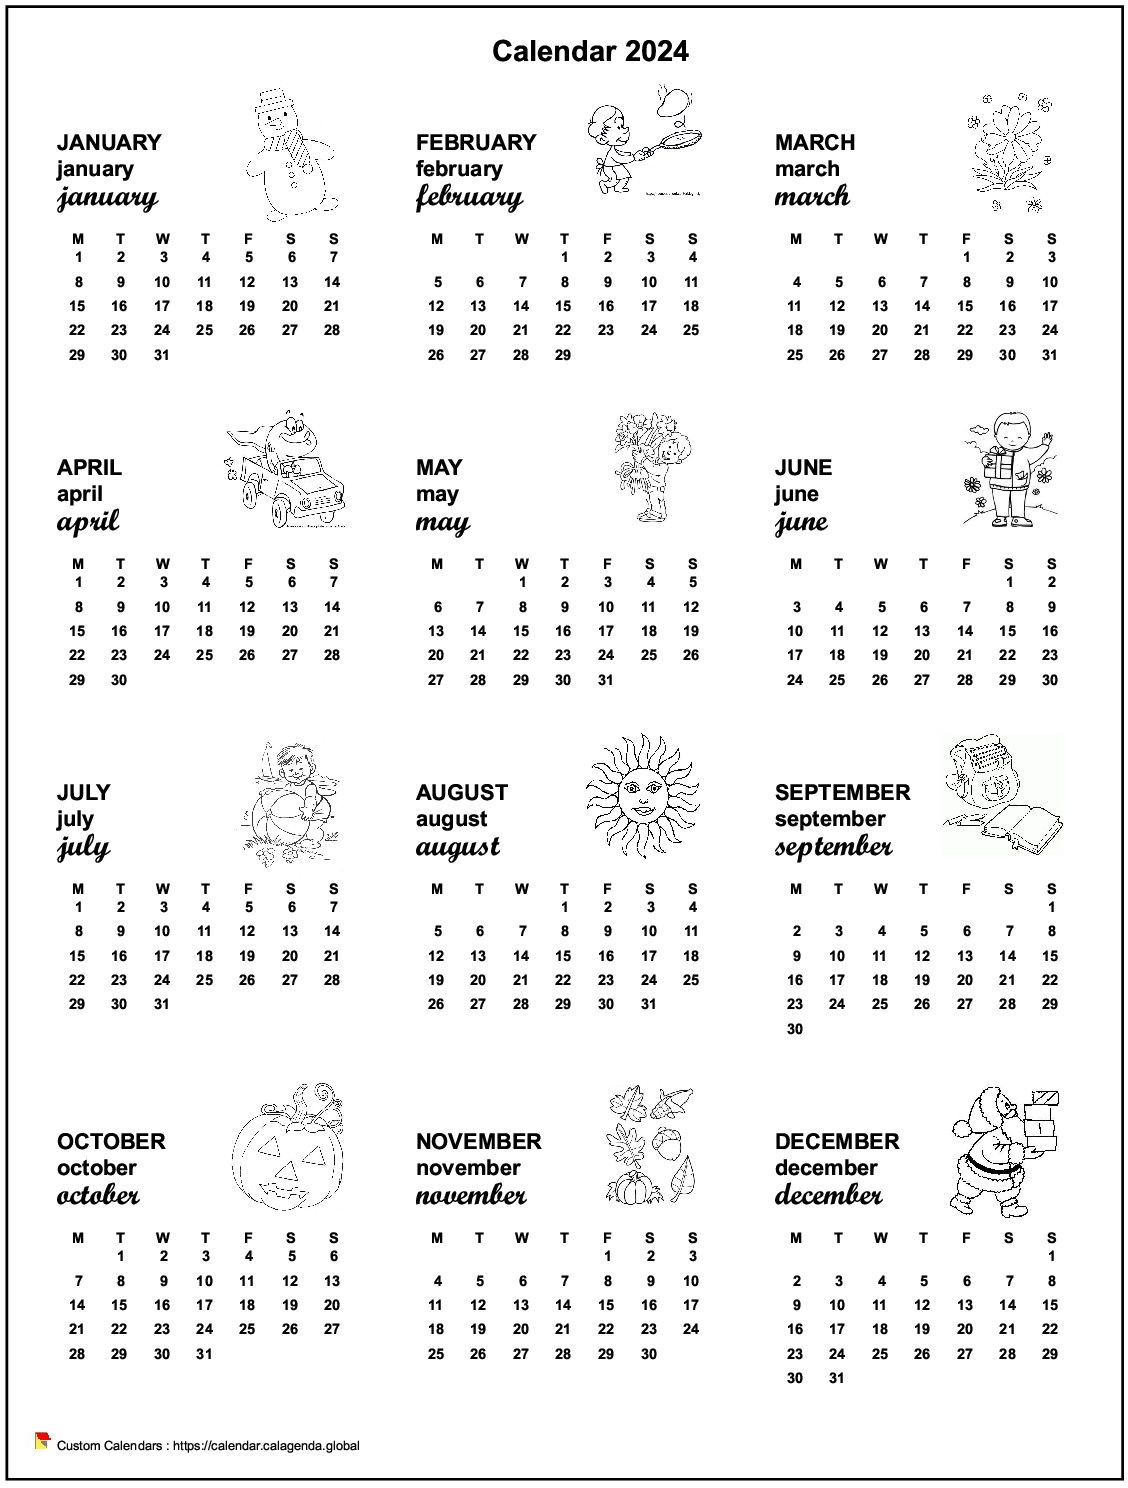 Calendar 2034 annual maternal and primary school